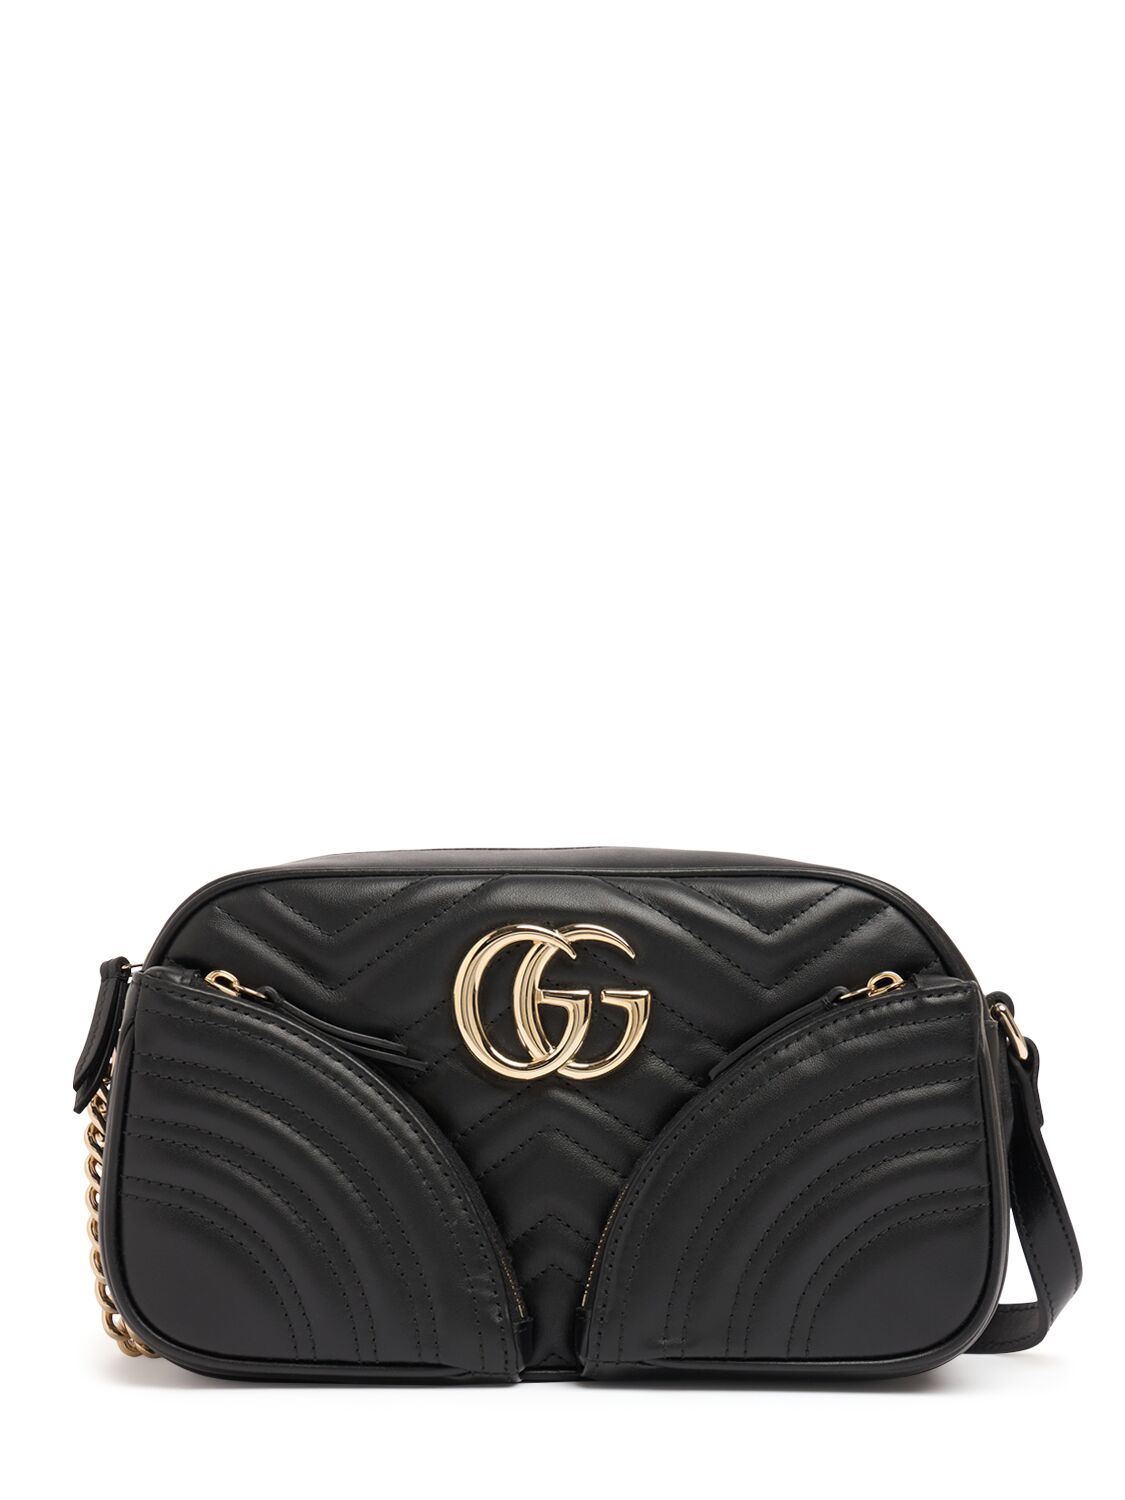 Gucci Gg Marmont Leather Shoulder Bag In Blue